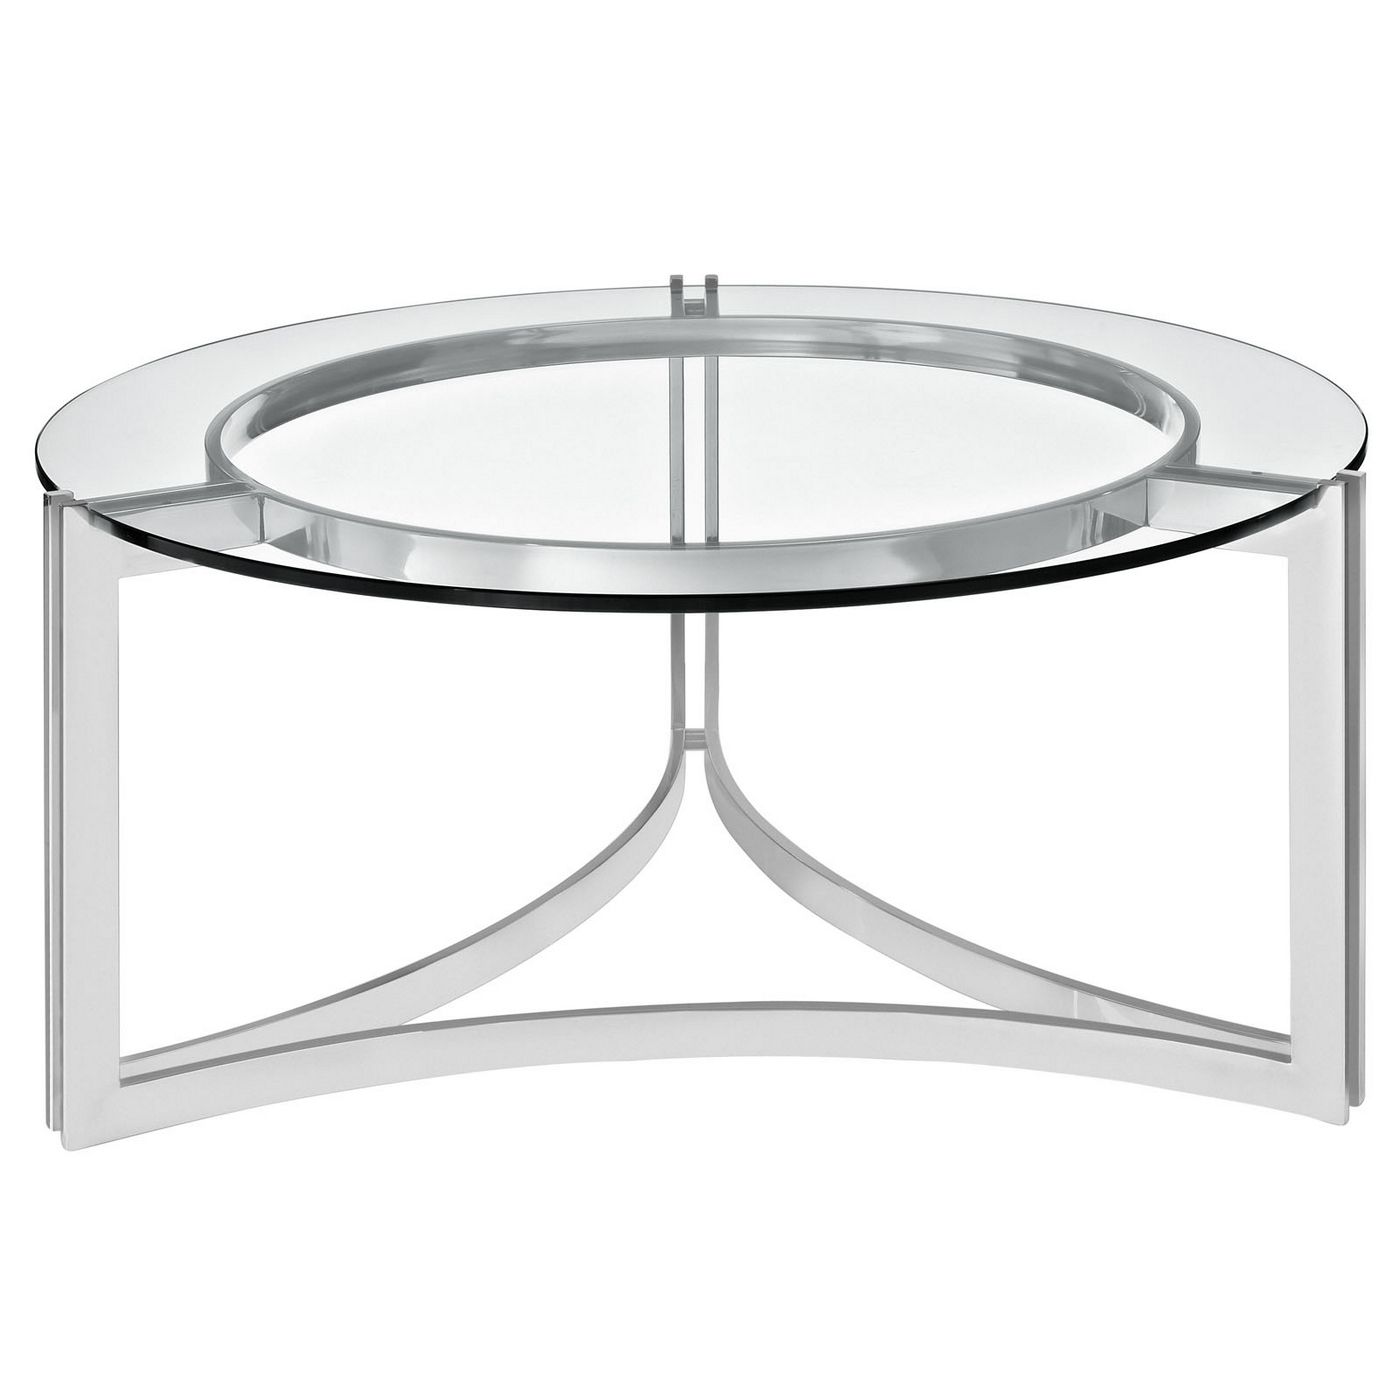 Signet Modern Stainless Steel Coffee Table W/ Round Tempered Glass Top With Regard To Stainless Steel And Glass Modern Desks (View 4 of 15)